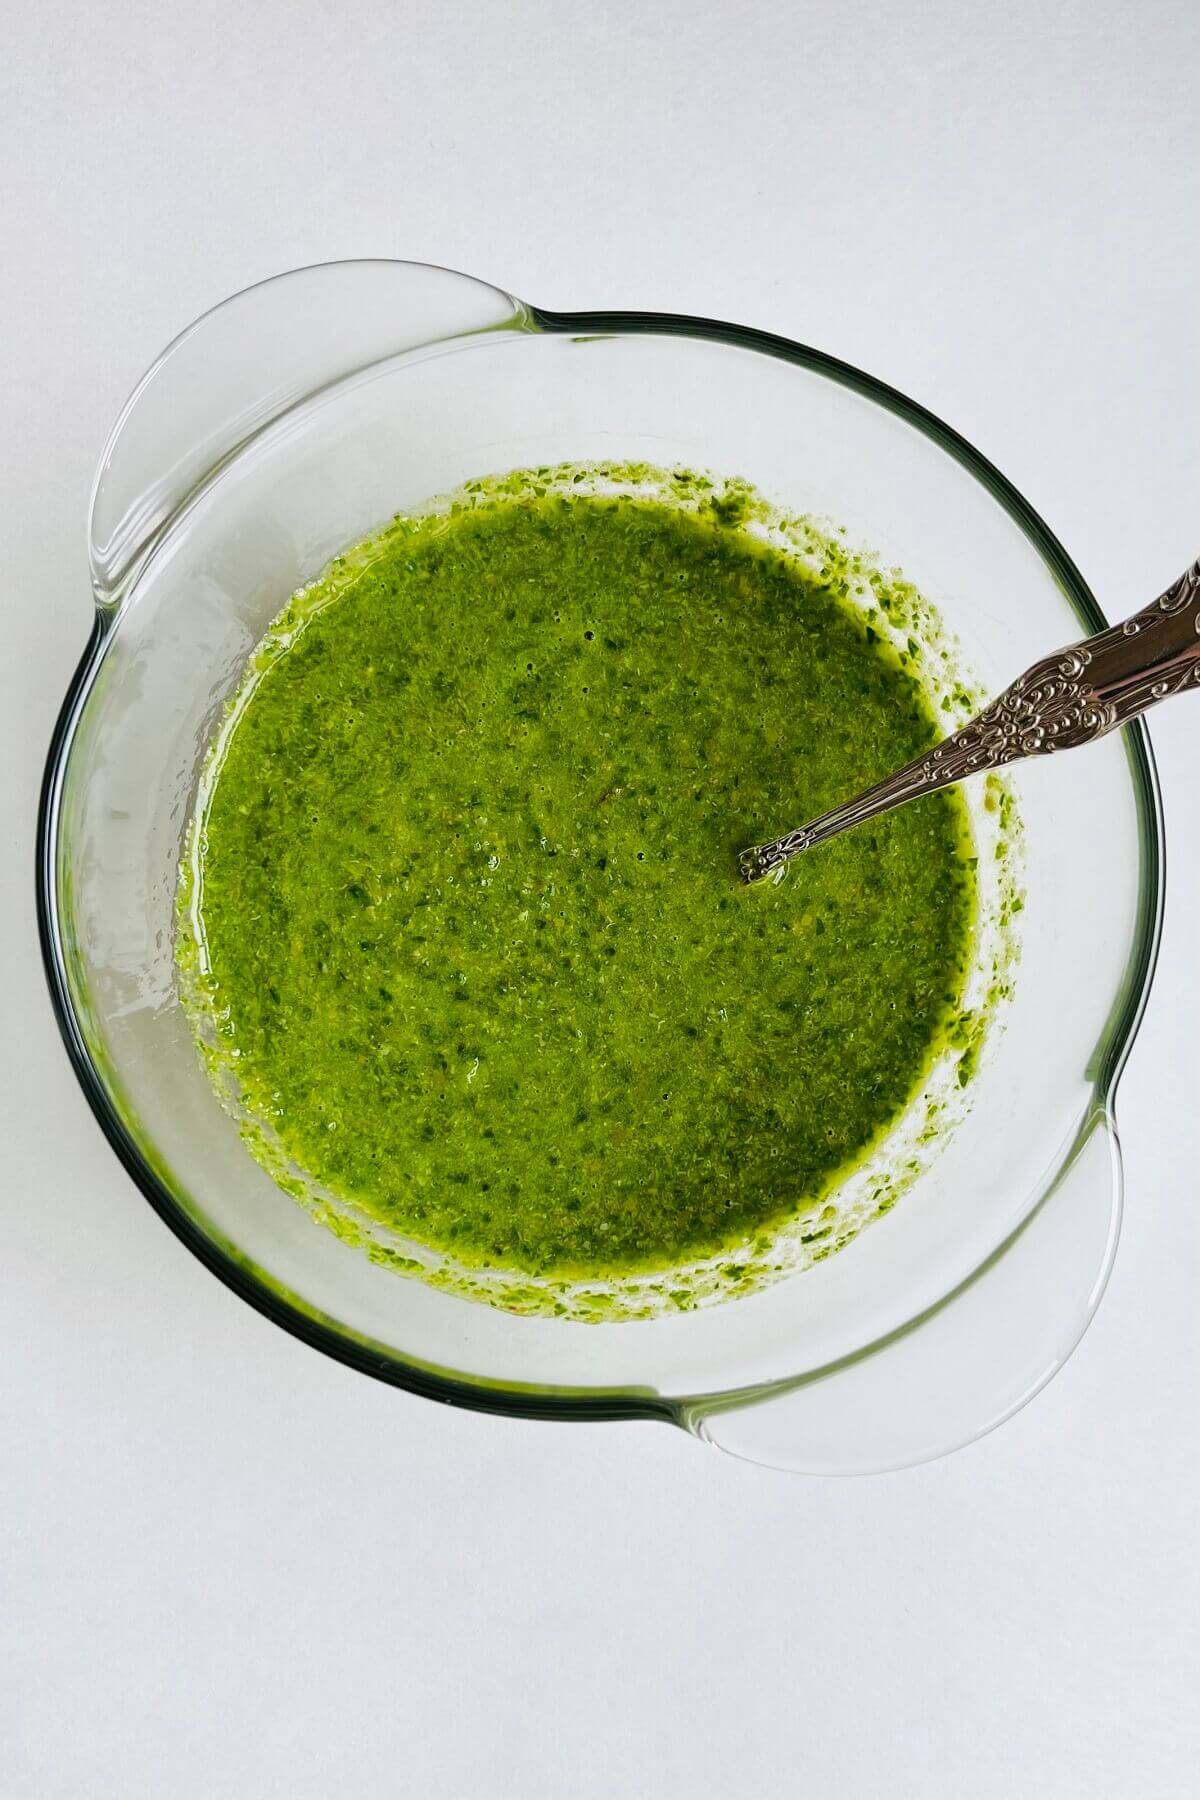 A bowl full of green sauce made with fresh herbs.